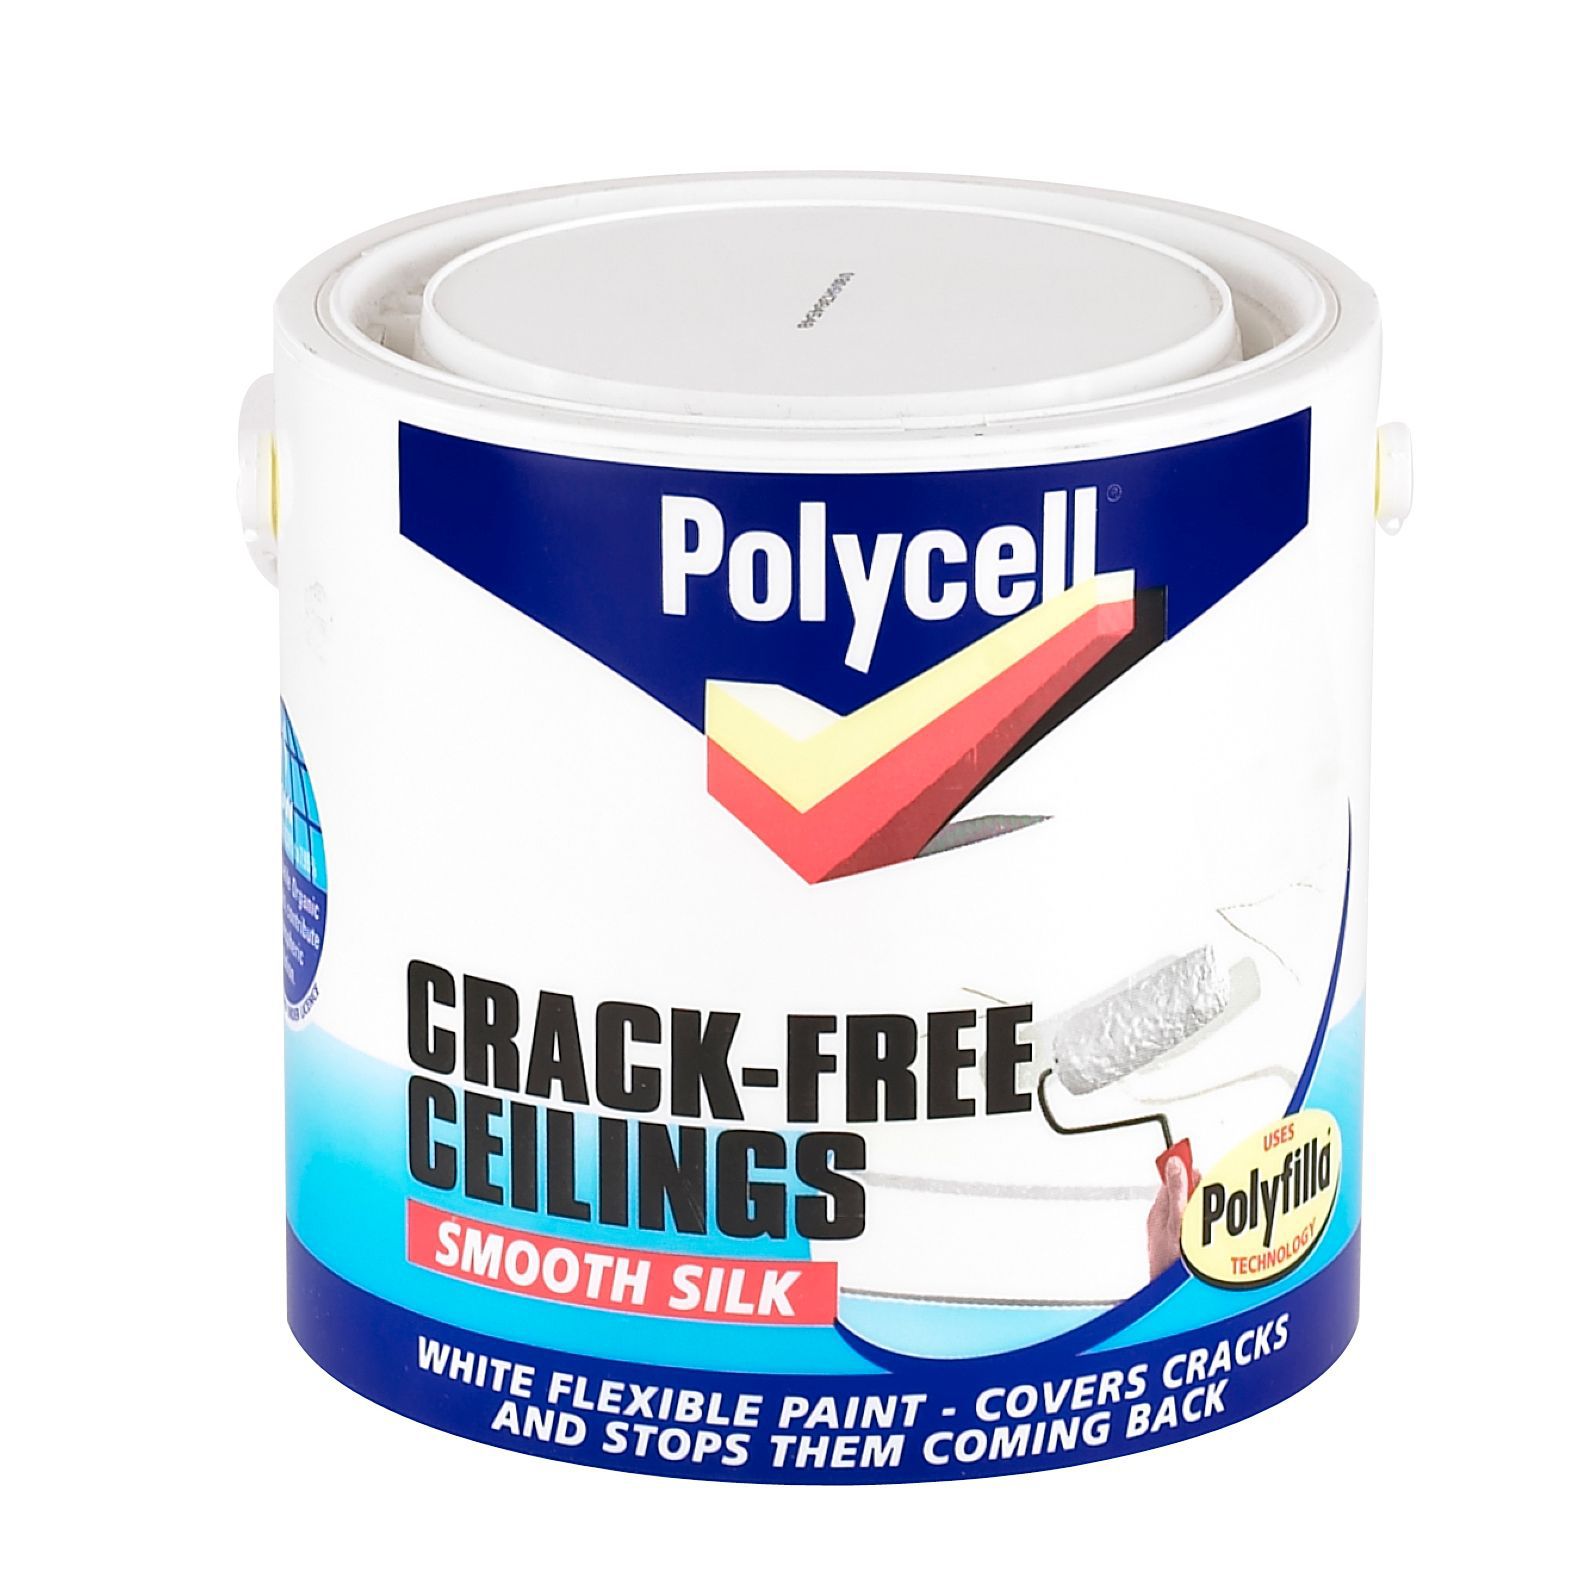 Free Load Polycell Crack Free Ceilings Reviews Quickfile